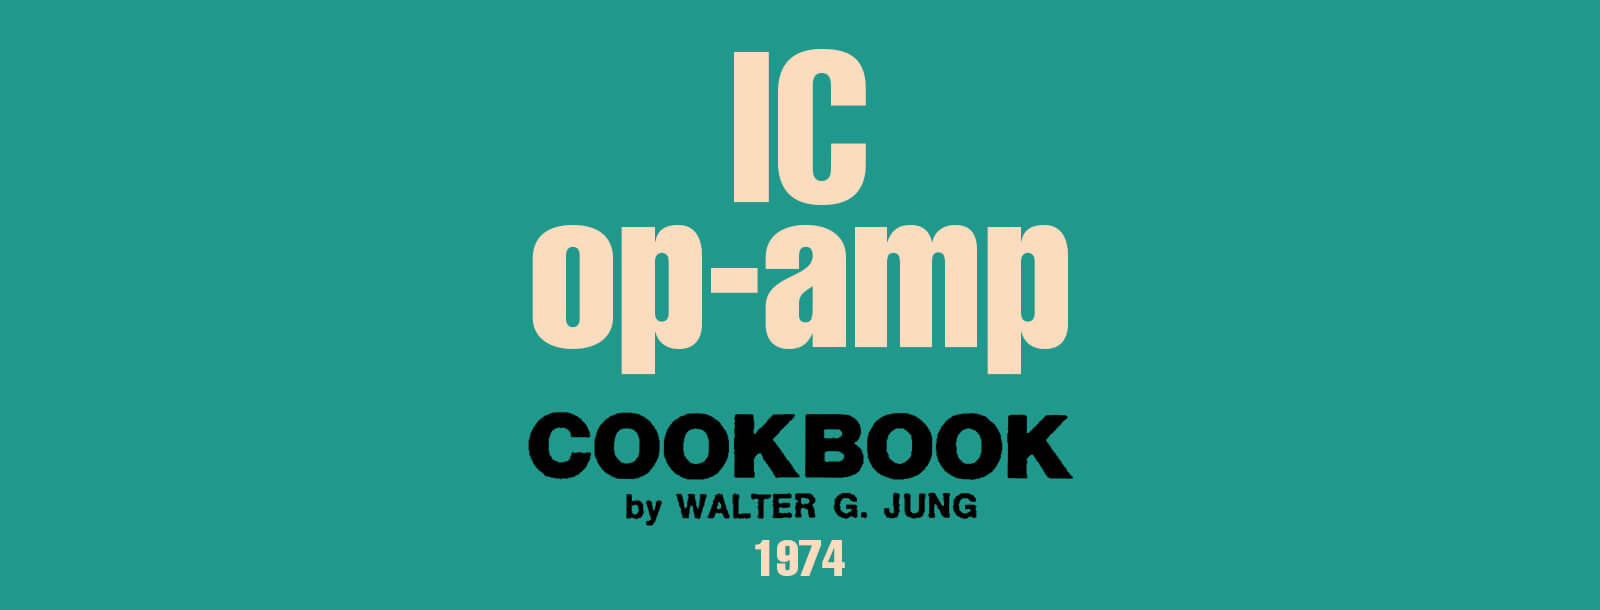 IC op-amp Cookbook by Walter G. Jung